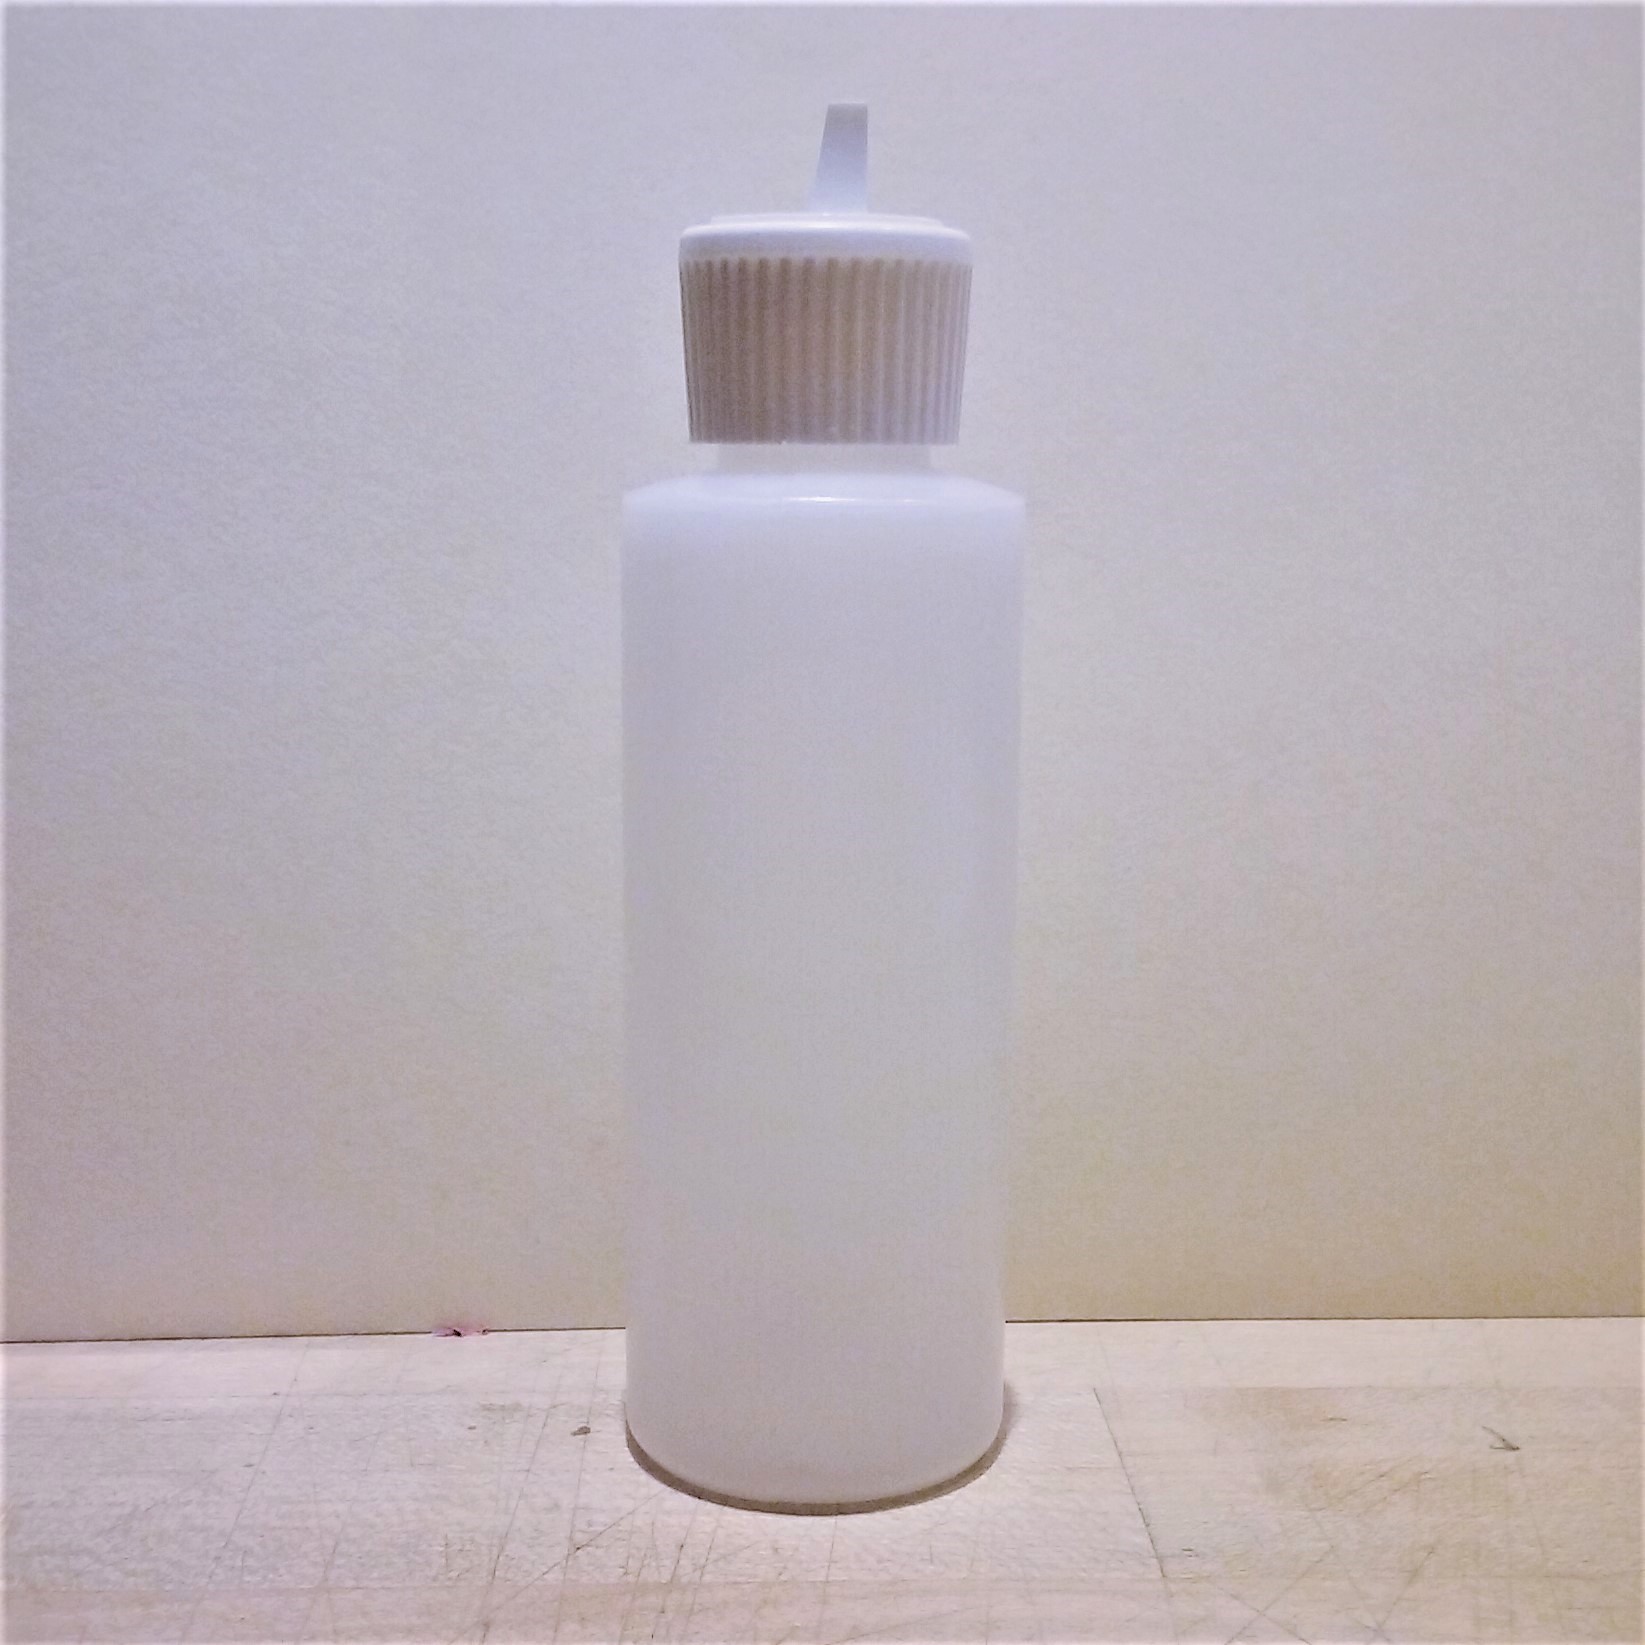 4 oz Plastic Cylindrical Bottle with White Flip Top